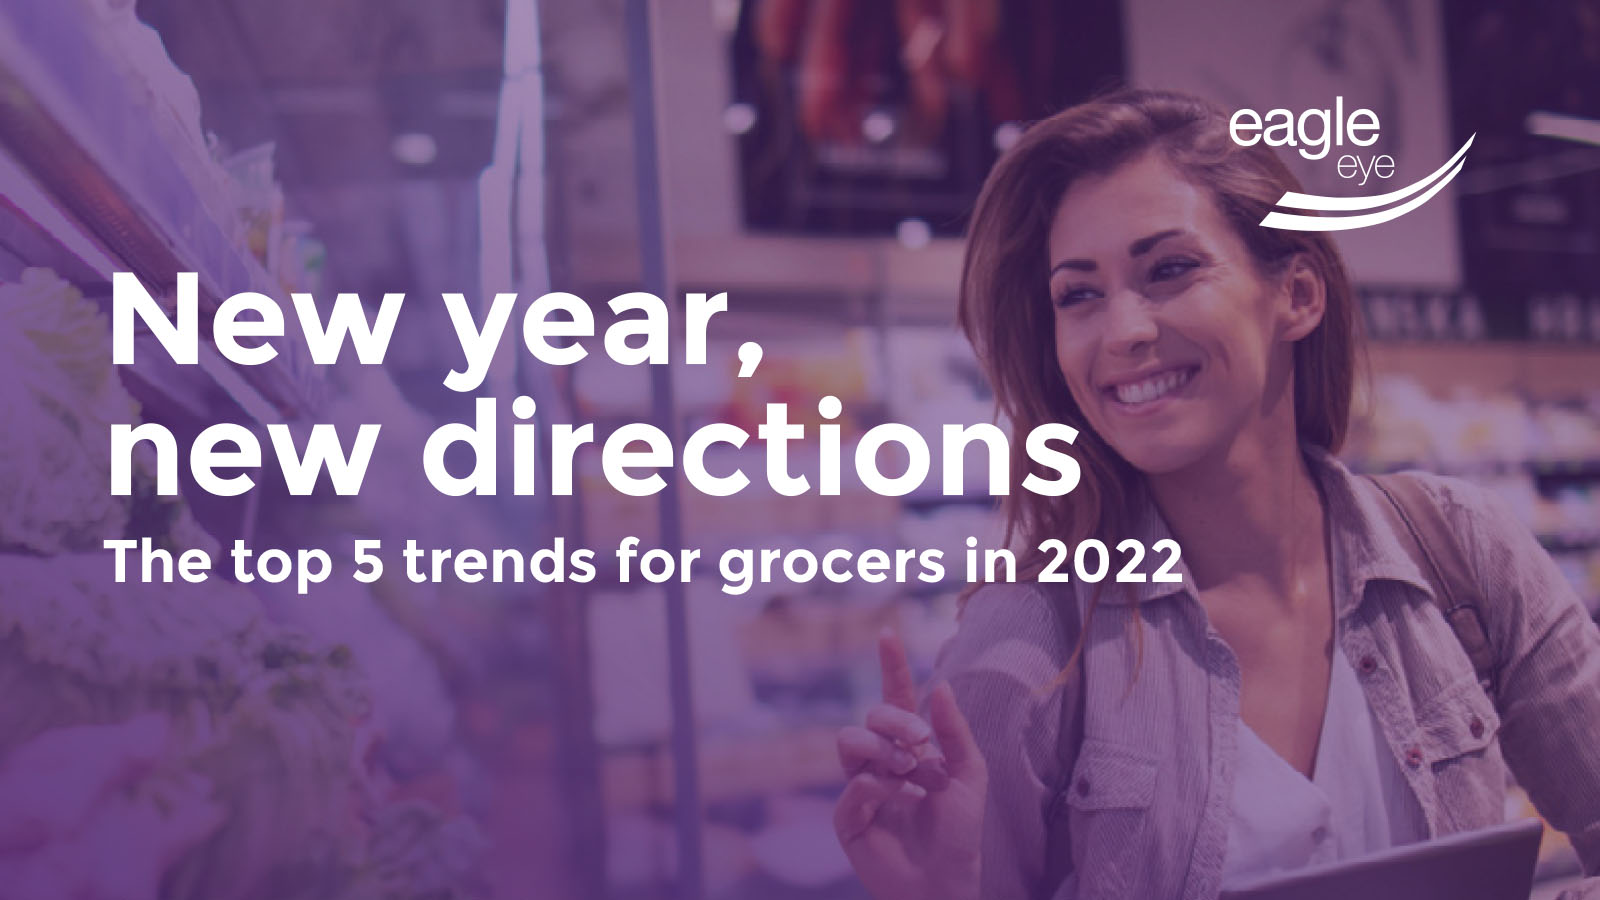 The top 5 trends for grocers